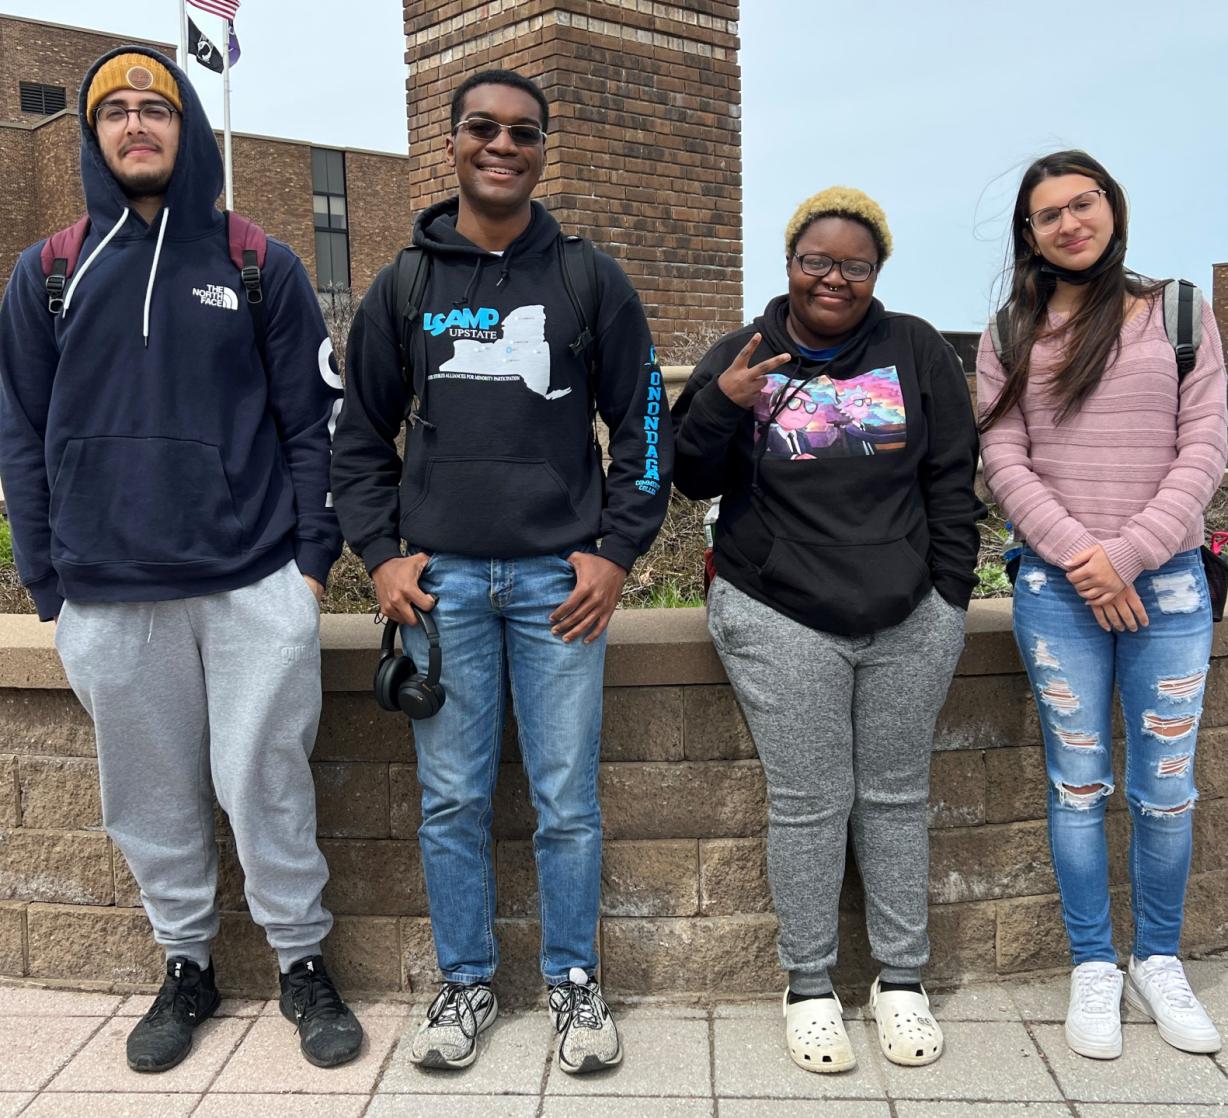 OCC students participating in the Bridges to Baccalaureate summer program at SUNY Binghamton include (left to right) Mohammedulameen Fakhri, Tim Brown, Jamiya Chandler, and Maria Garcia Guntin.